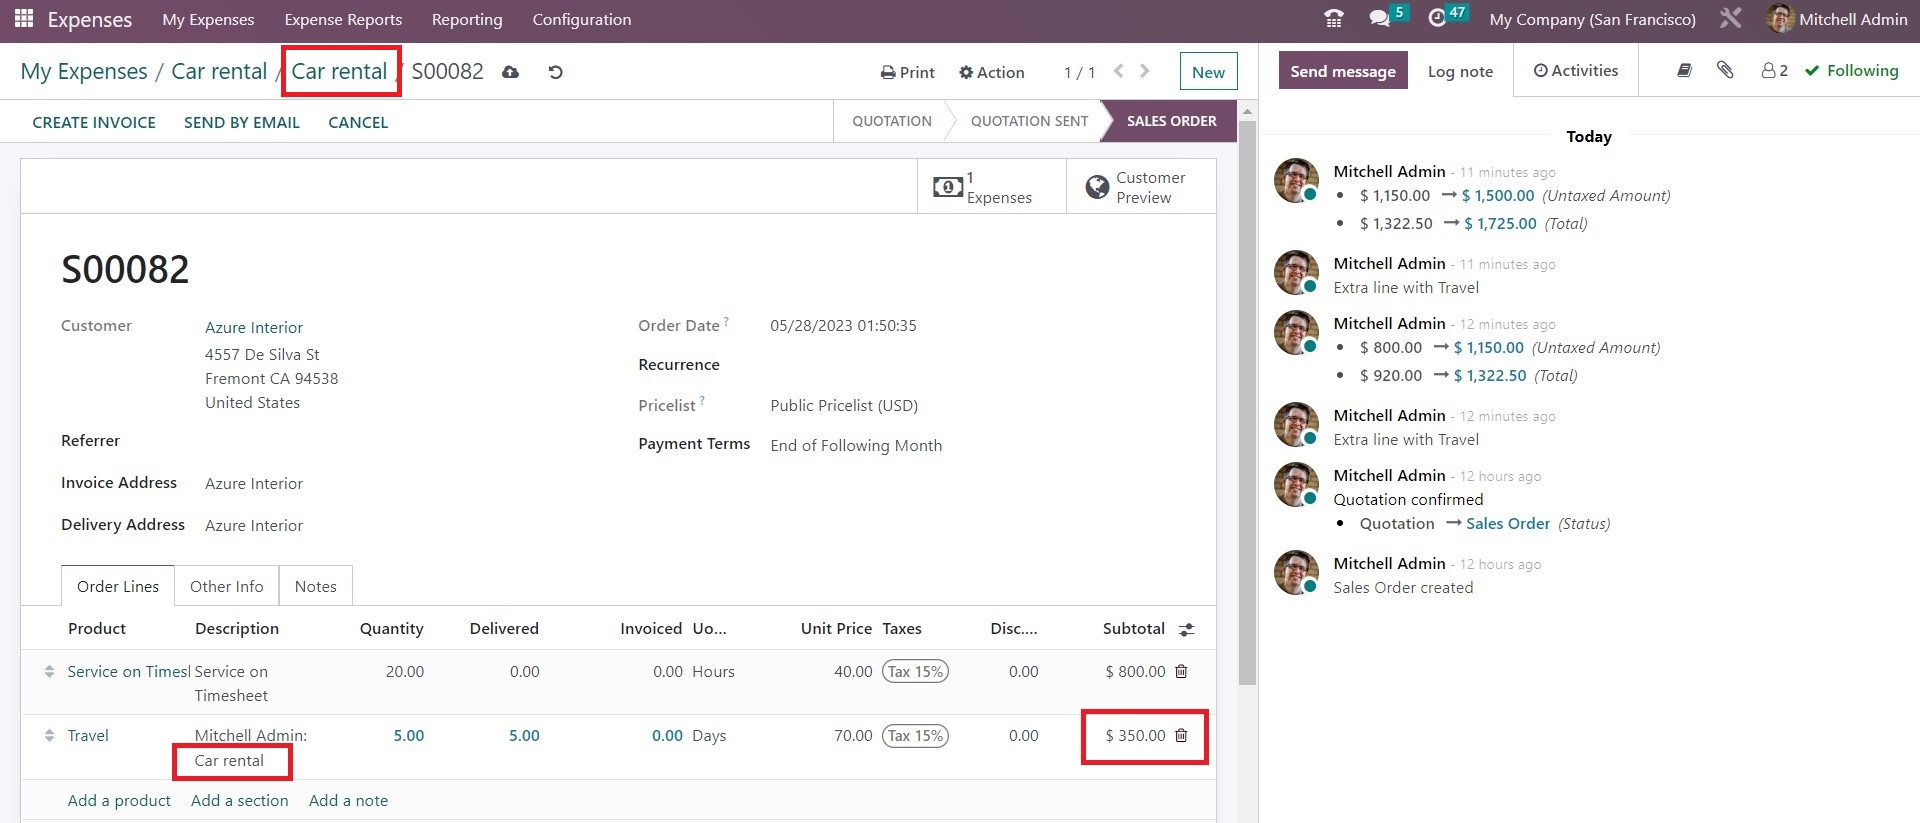 Reinvoicing Expenses To Customers in Odoo - 11 - Midis